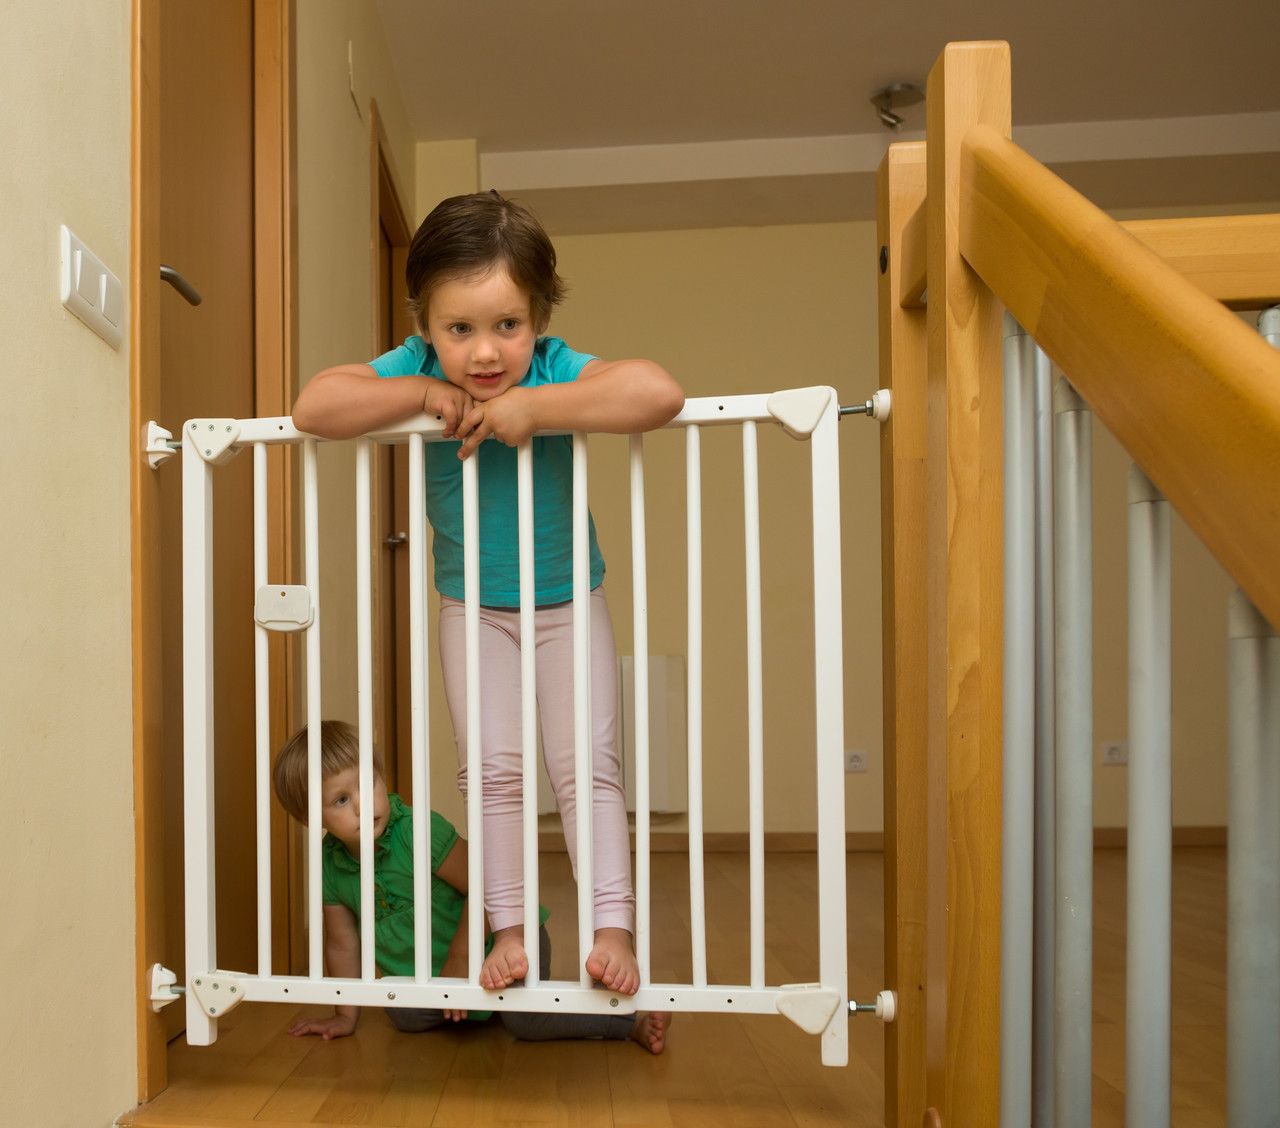 Stair railing. For the safety of children